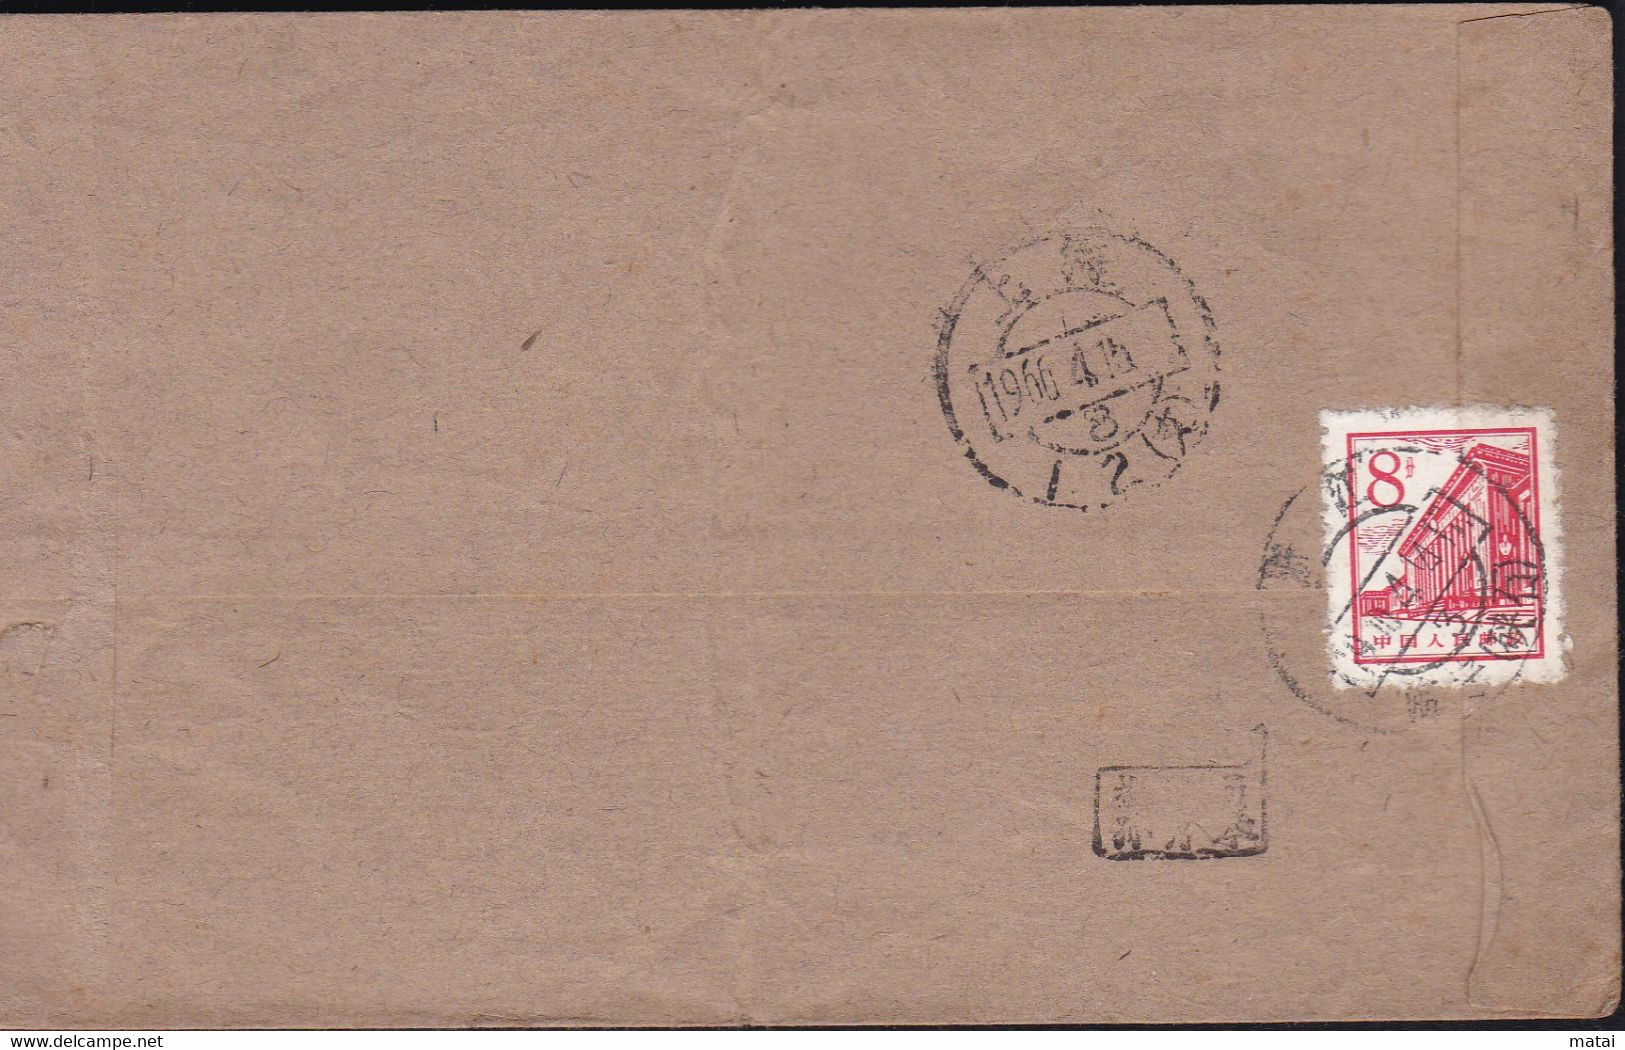 CHINA  CHINE CINA 1966 ZHEJIANG HAINING TO SHANGHAI COVER WITH 8c STAMP - Covers & Documents